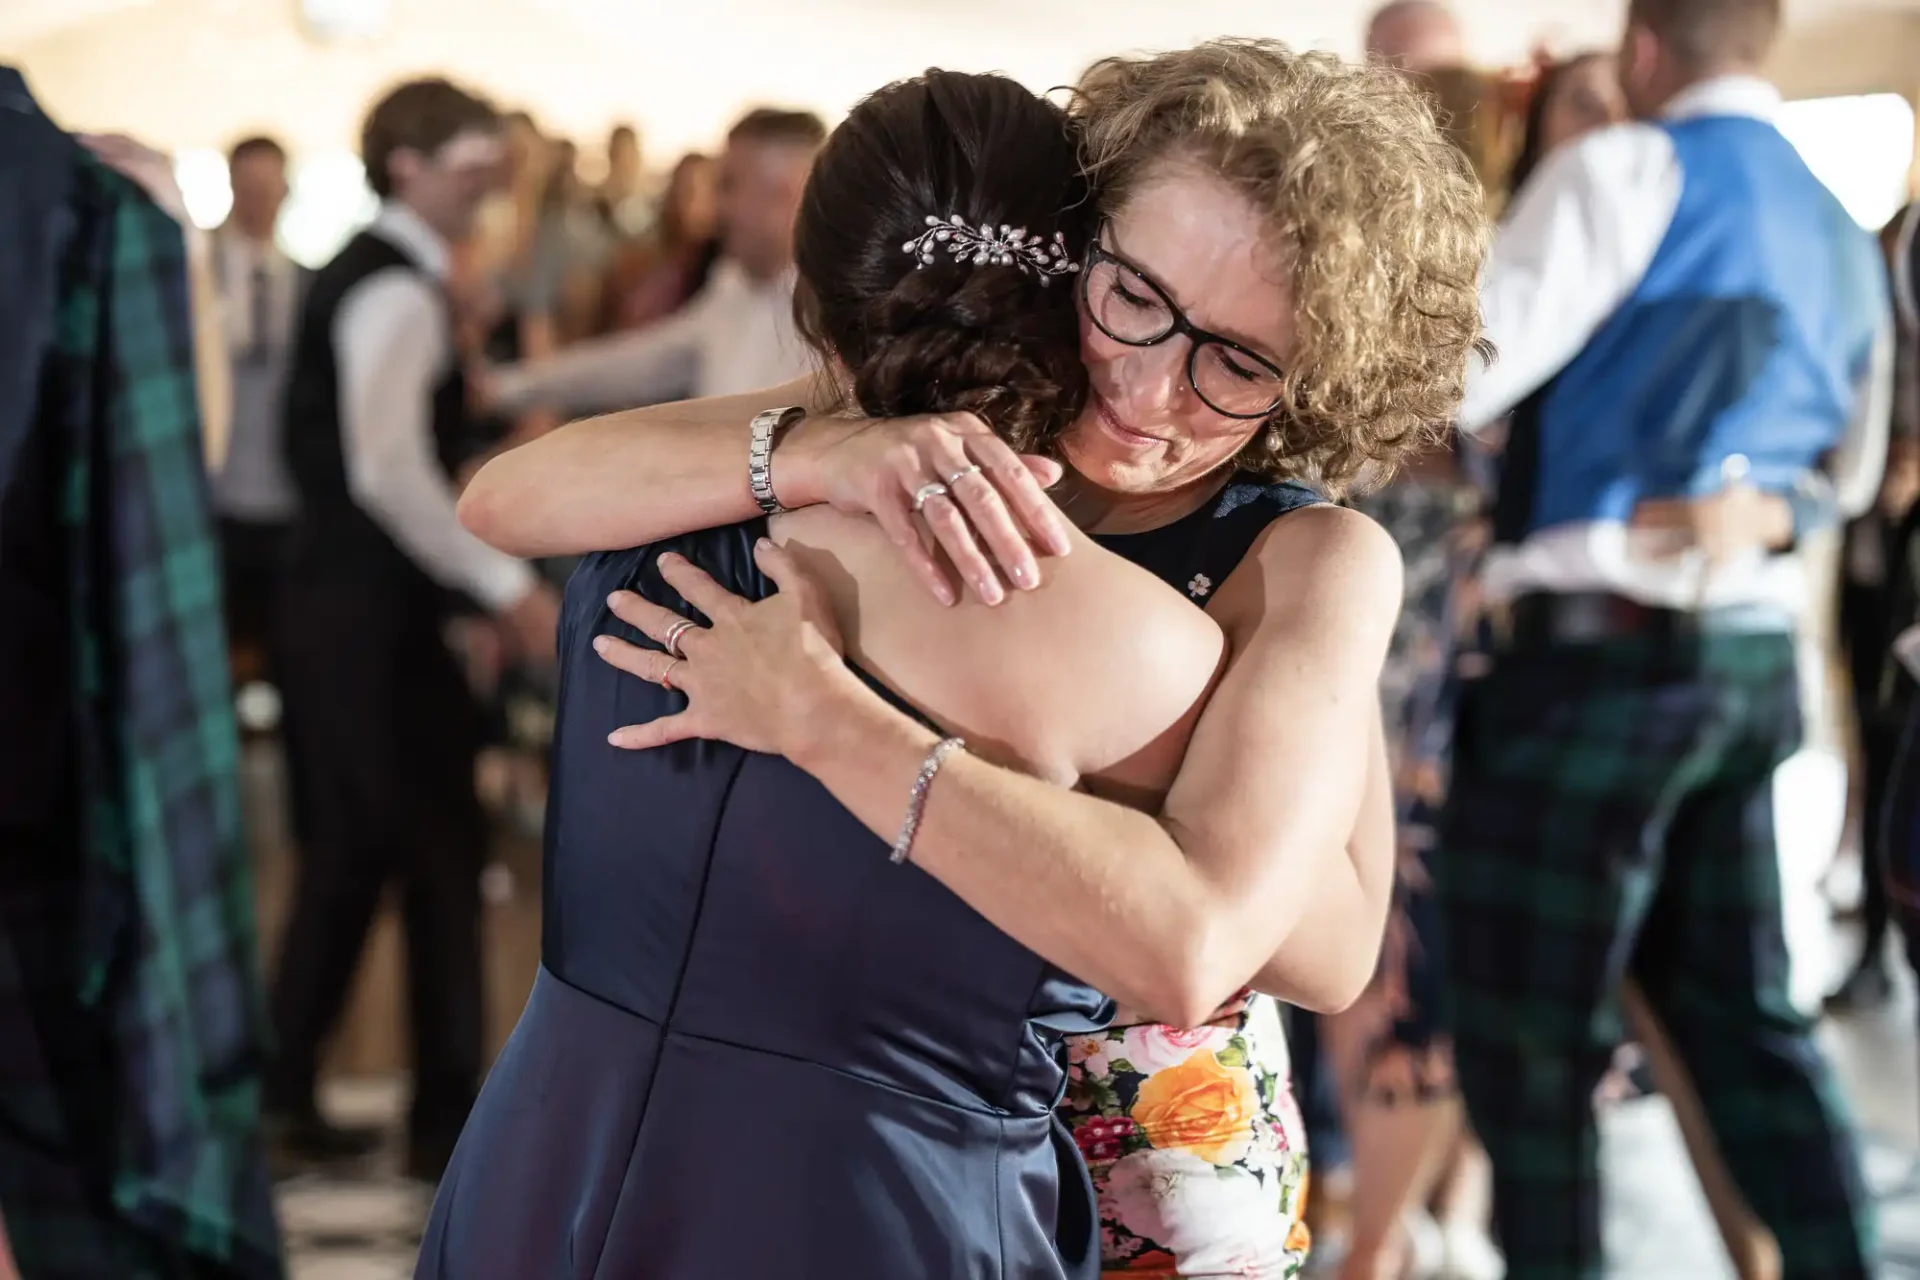 Two women embracing warmly at a dance event, surrounded by other attendees, one wearing a floral dress and the other in a navy dress with glasses.